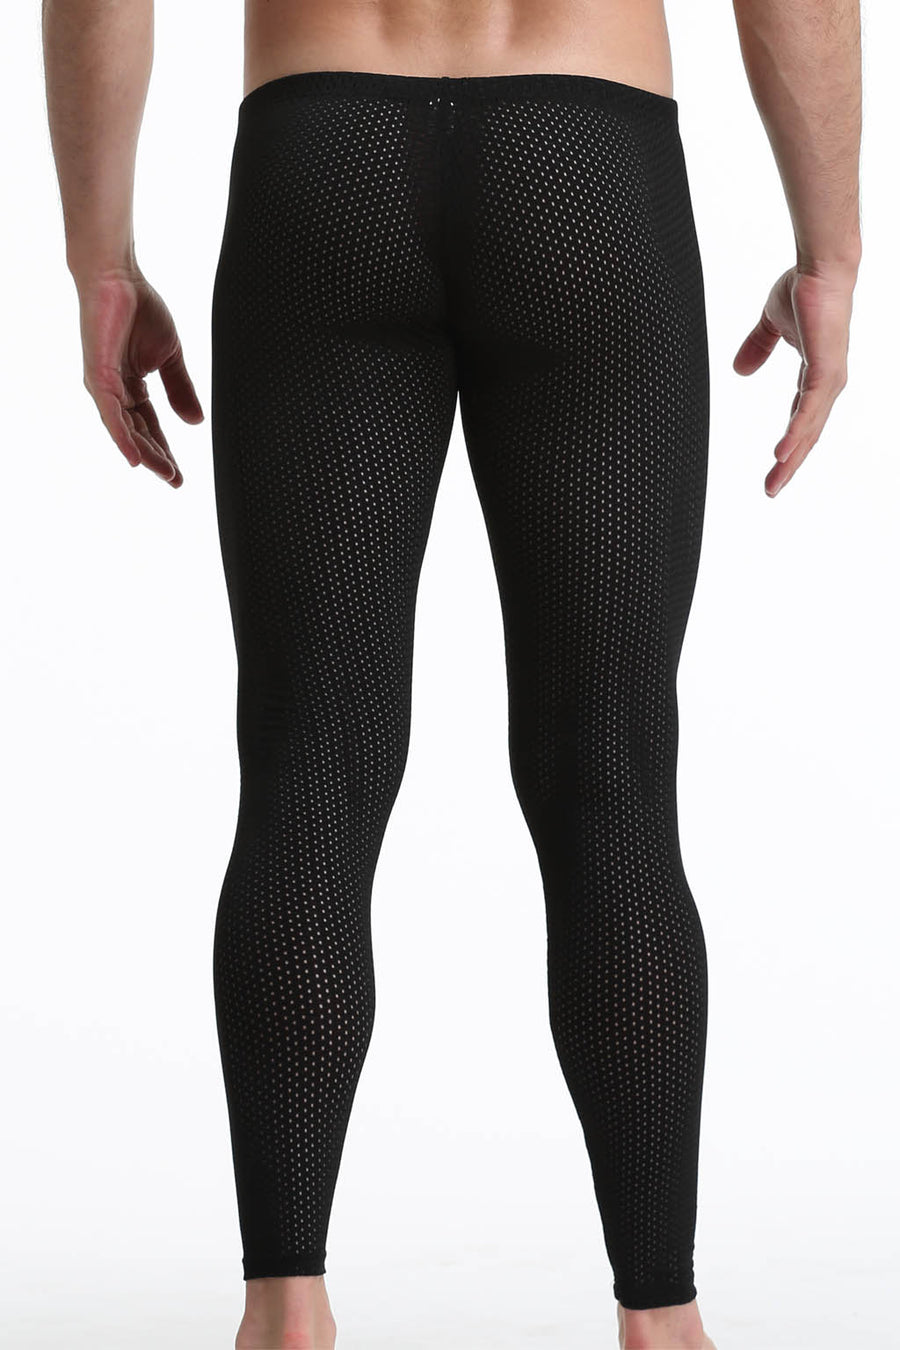 BfM Mens Lowrise Eyelet Tights - Enhanced Pouch